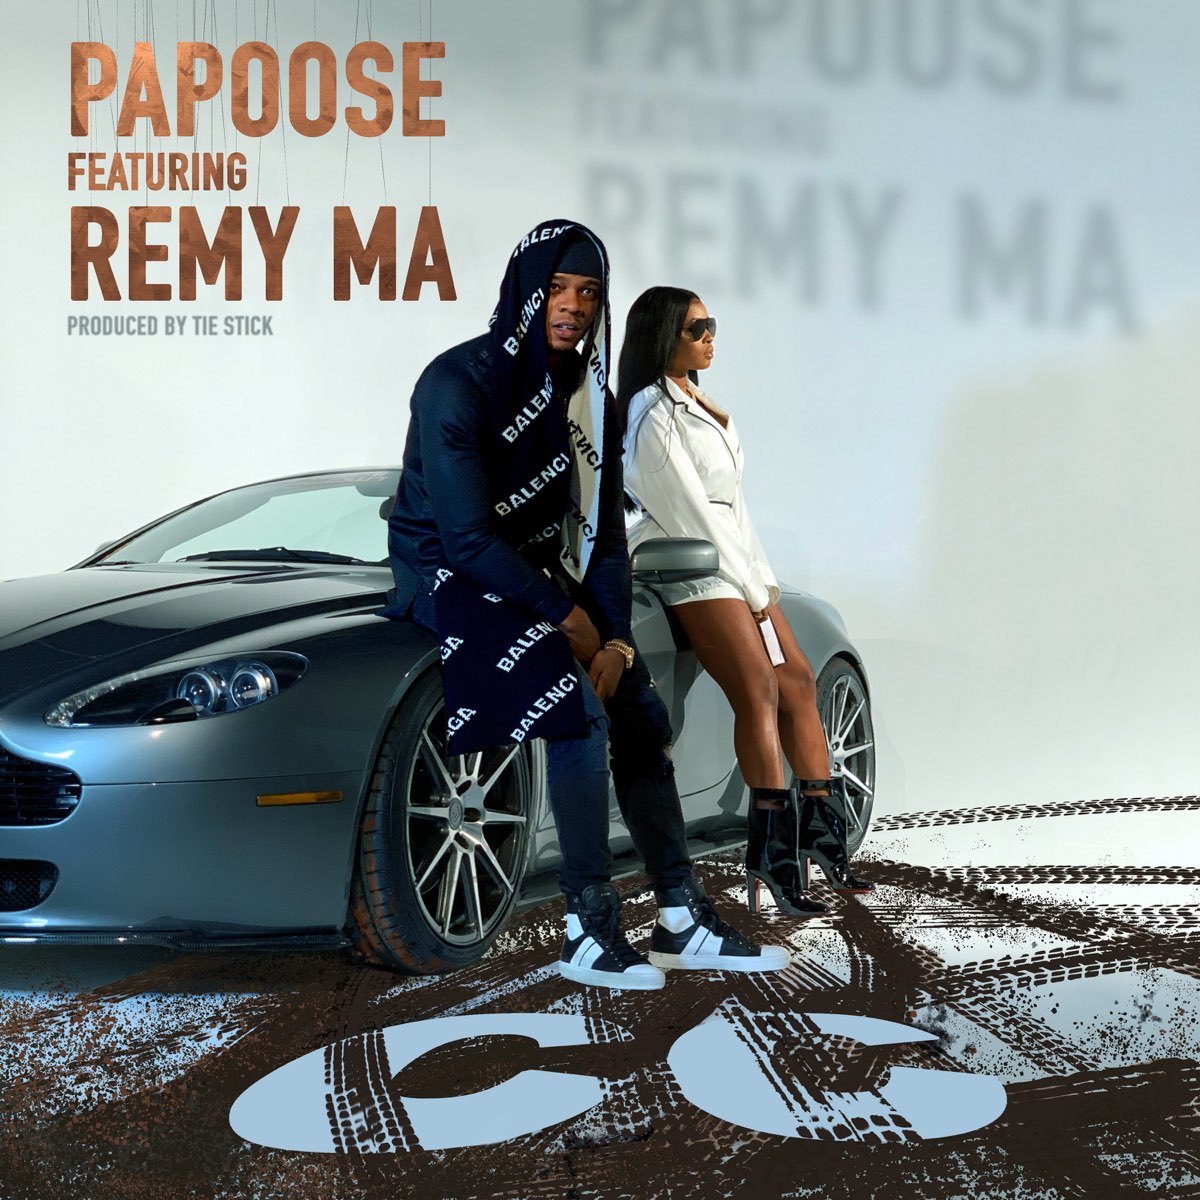 Feat remy. Papoose. Papoose криями. Papoose перевод. Papoose feat. Tre Williams - PAP did.